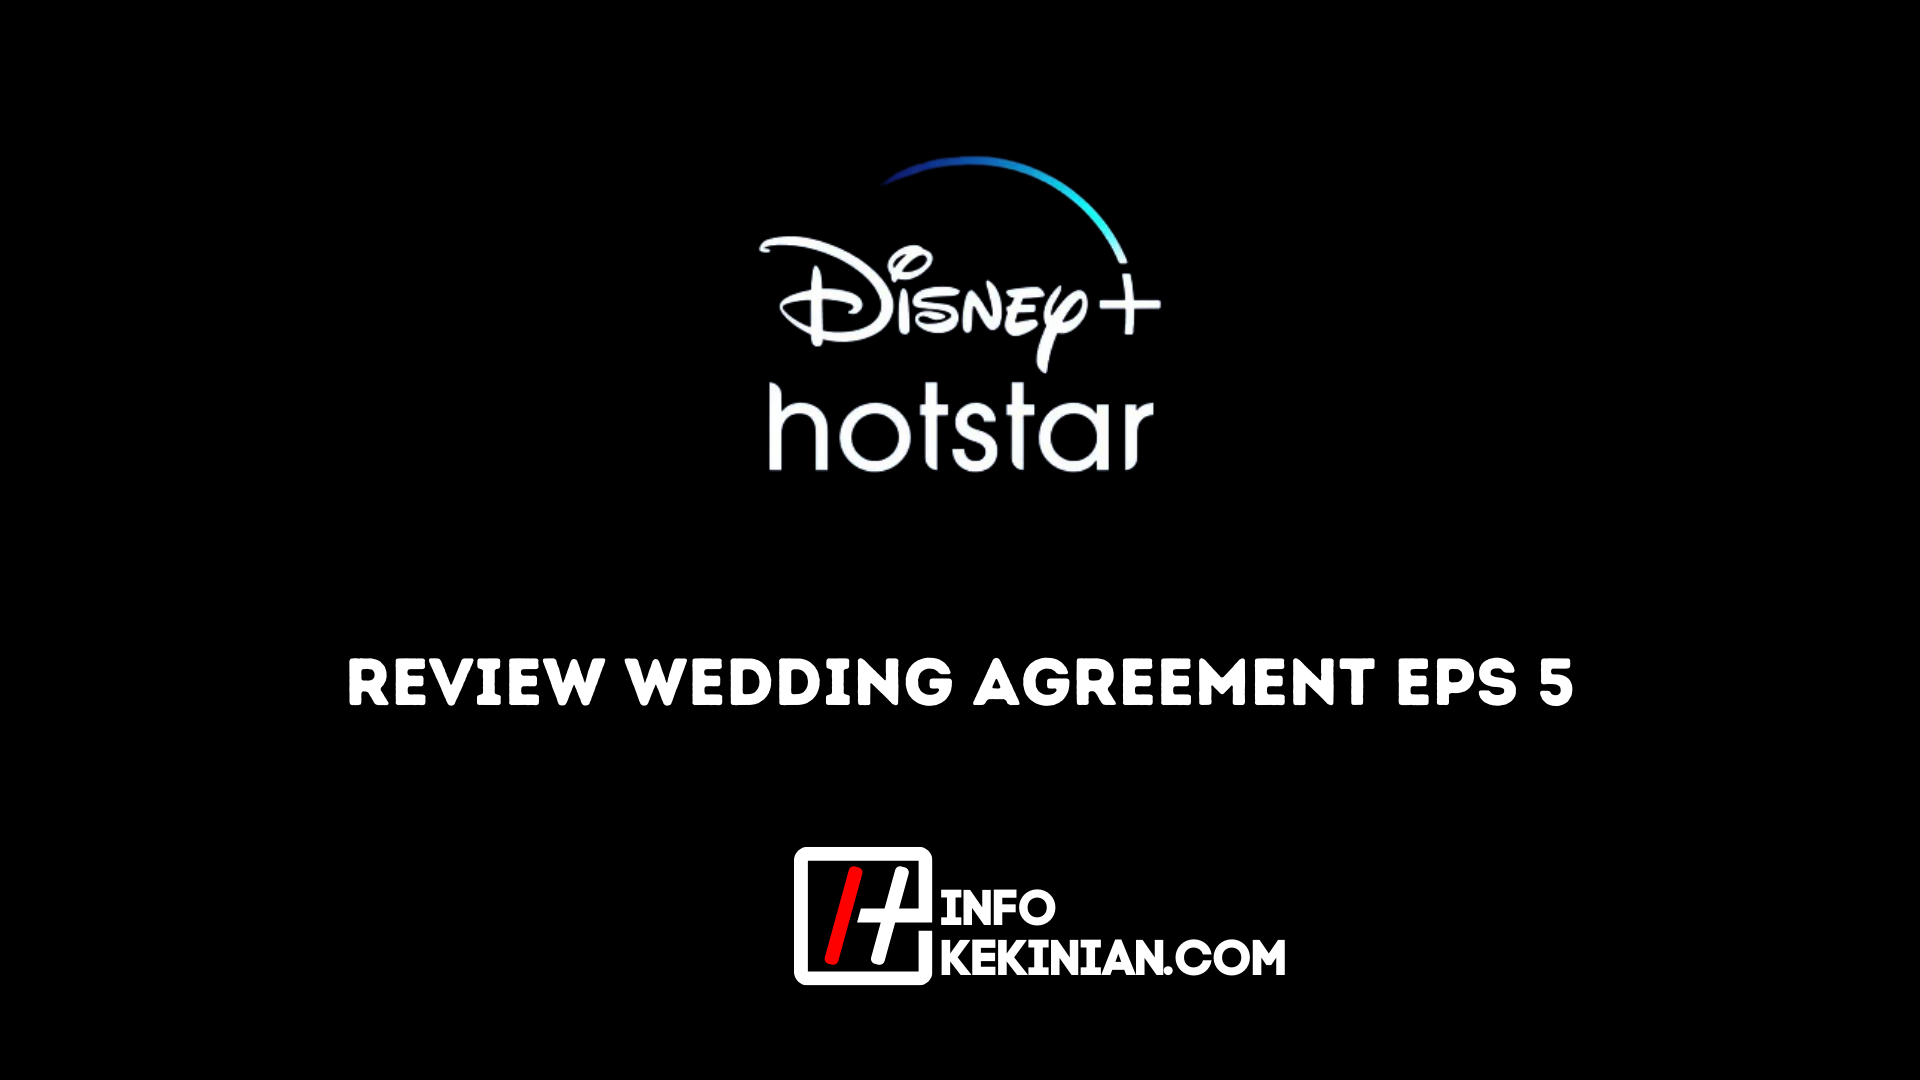 Review Wedding Agreement Eps 5